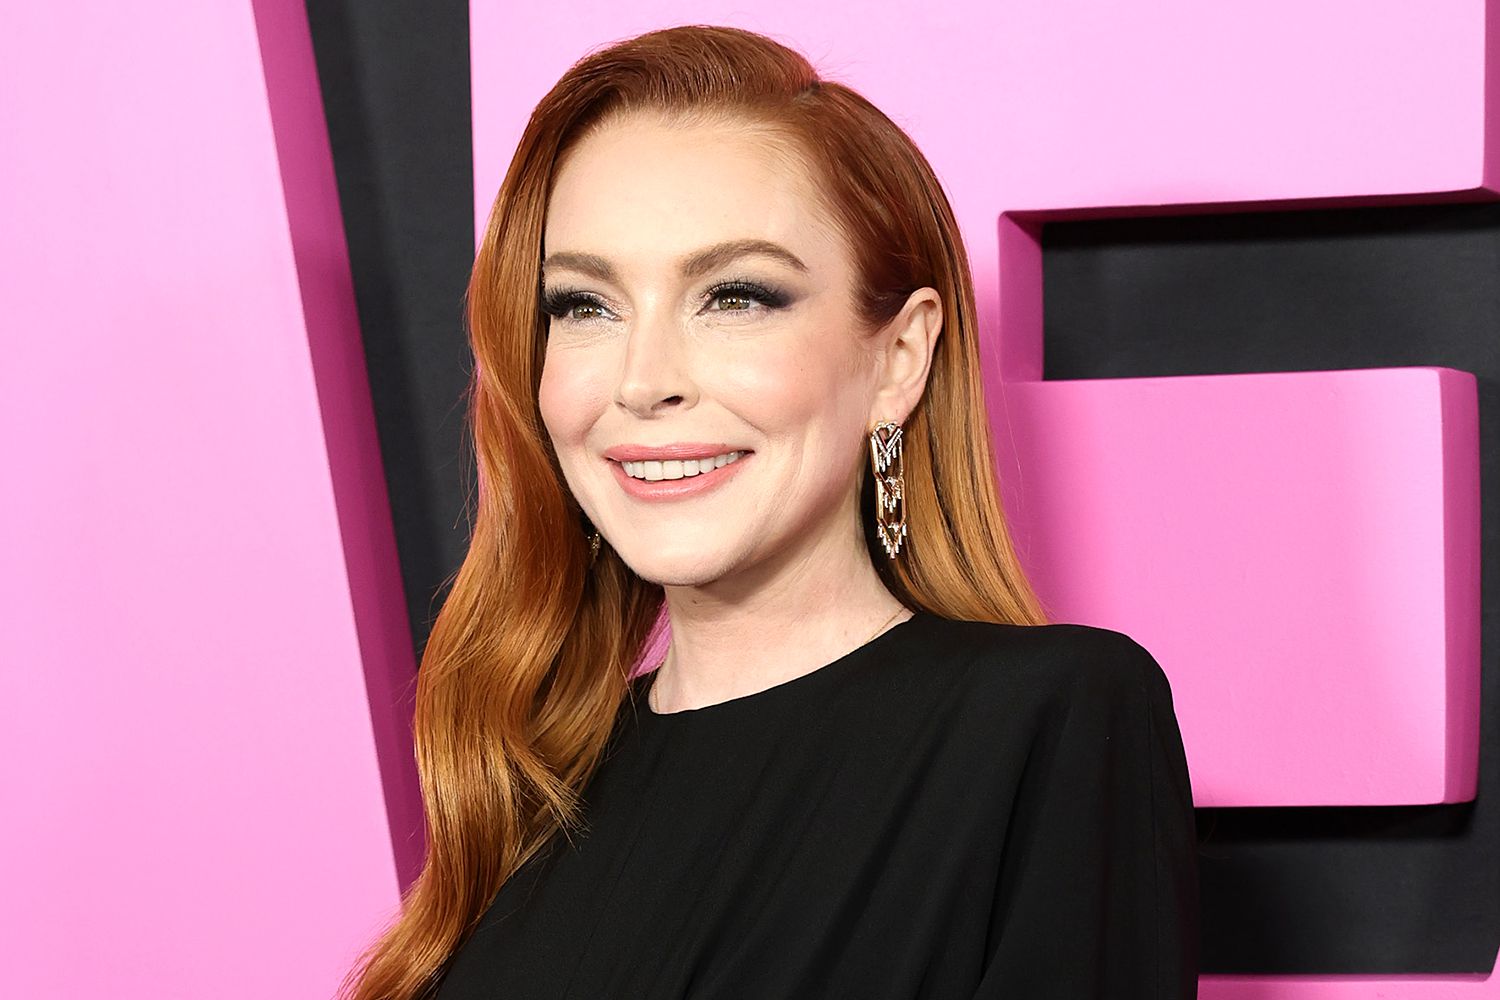 Former 'Mean Girls' Star Lindsay Lohan Makes Surprise Cameo in Foreign